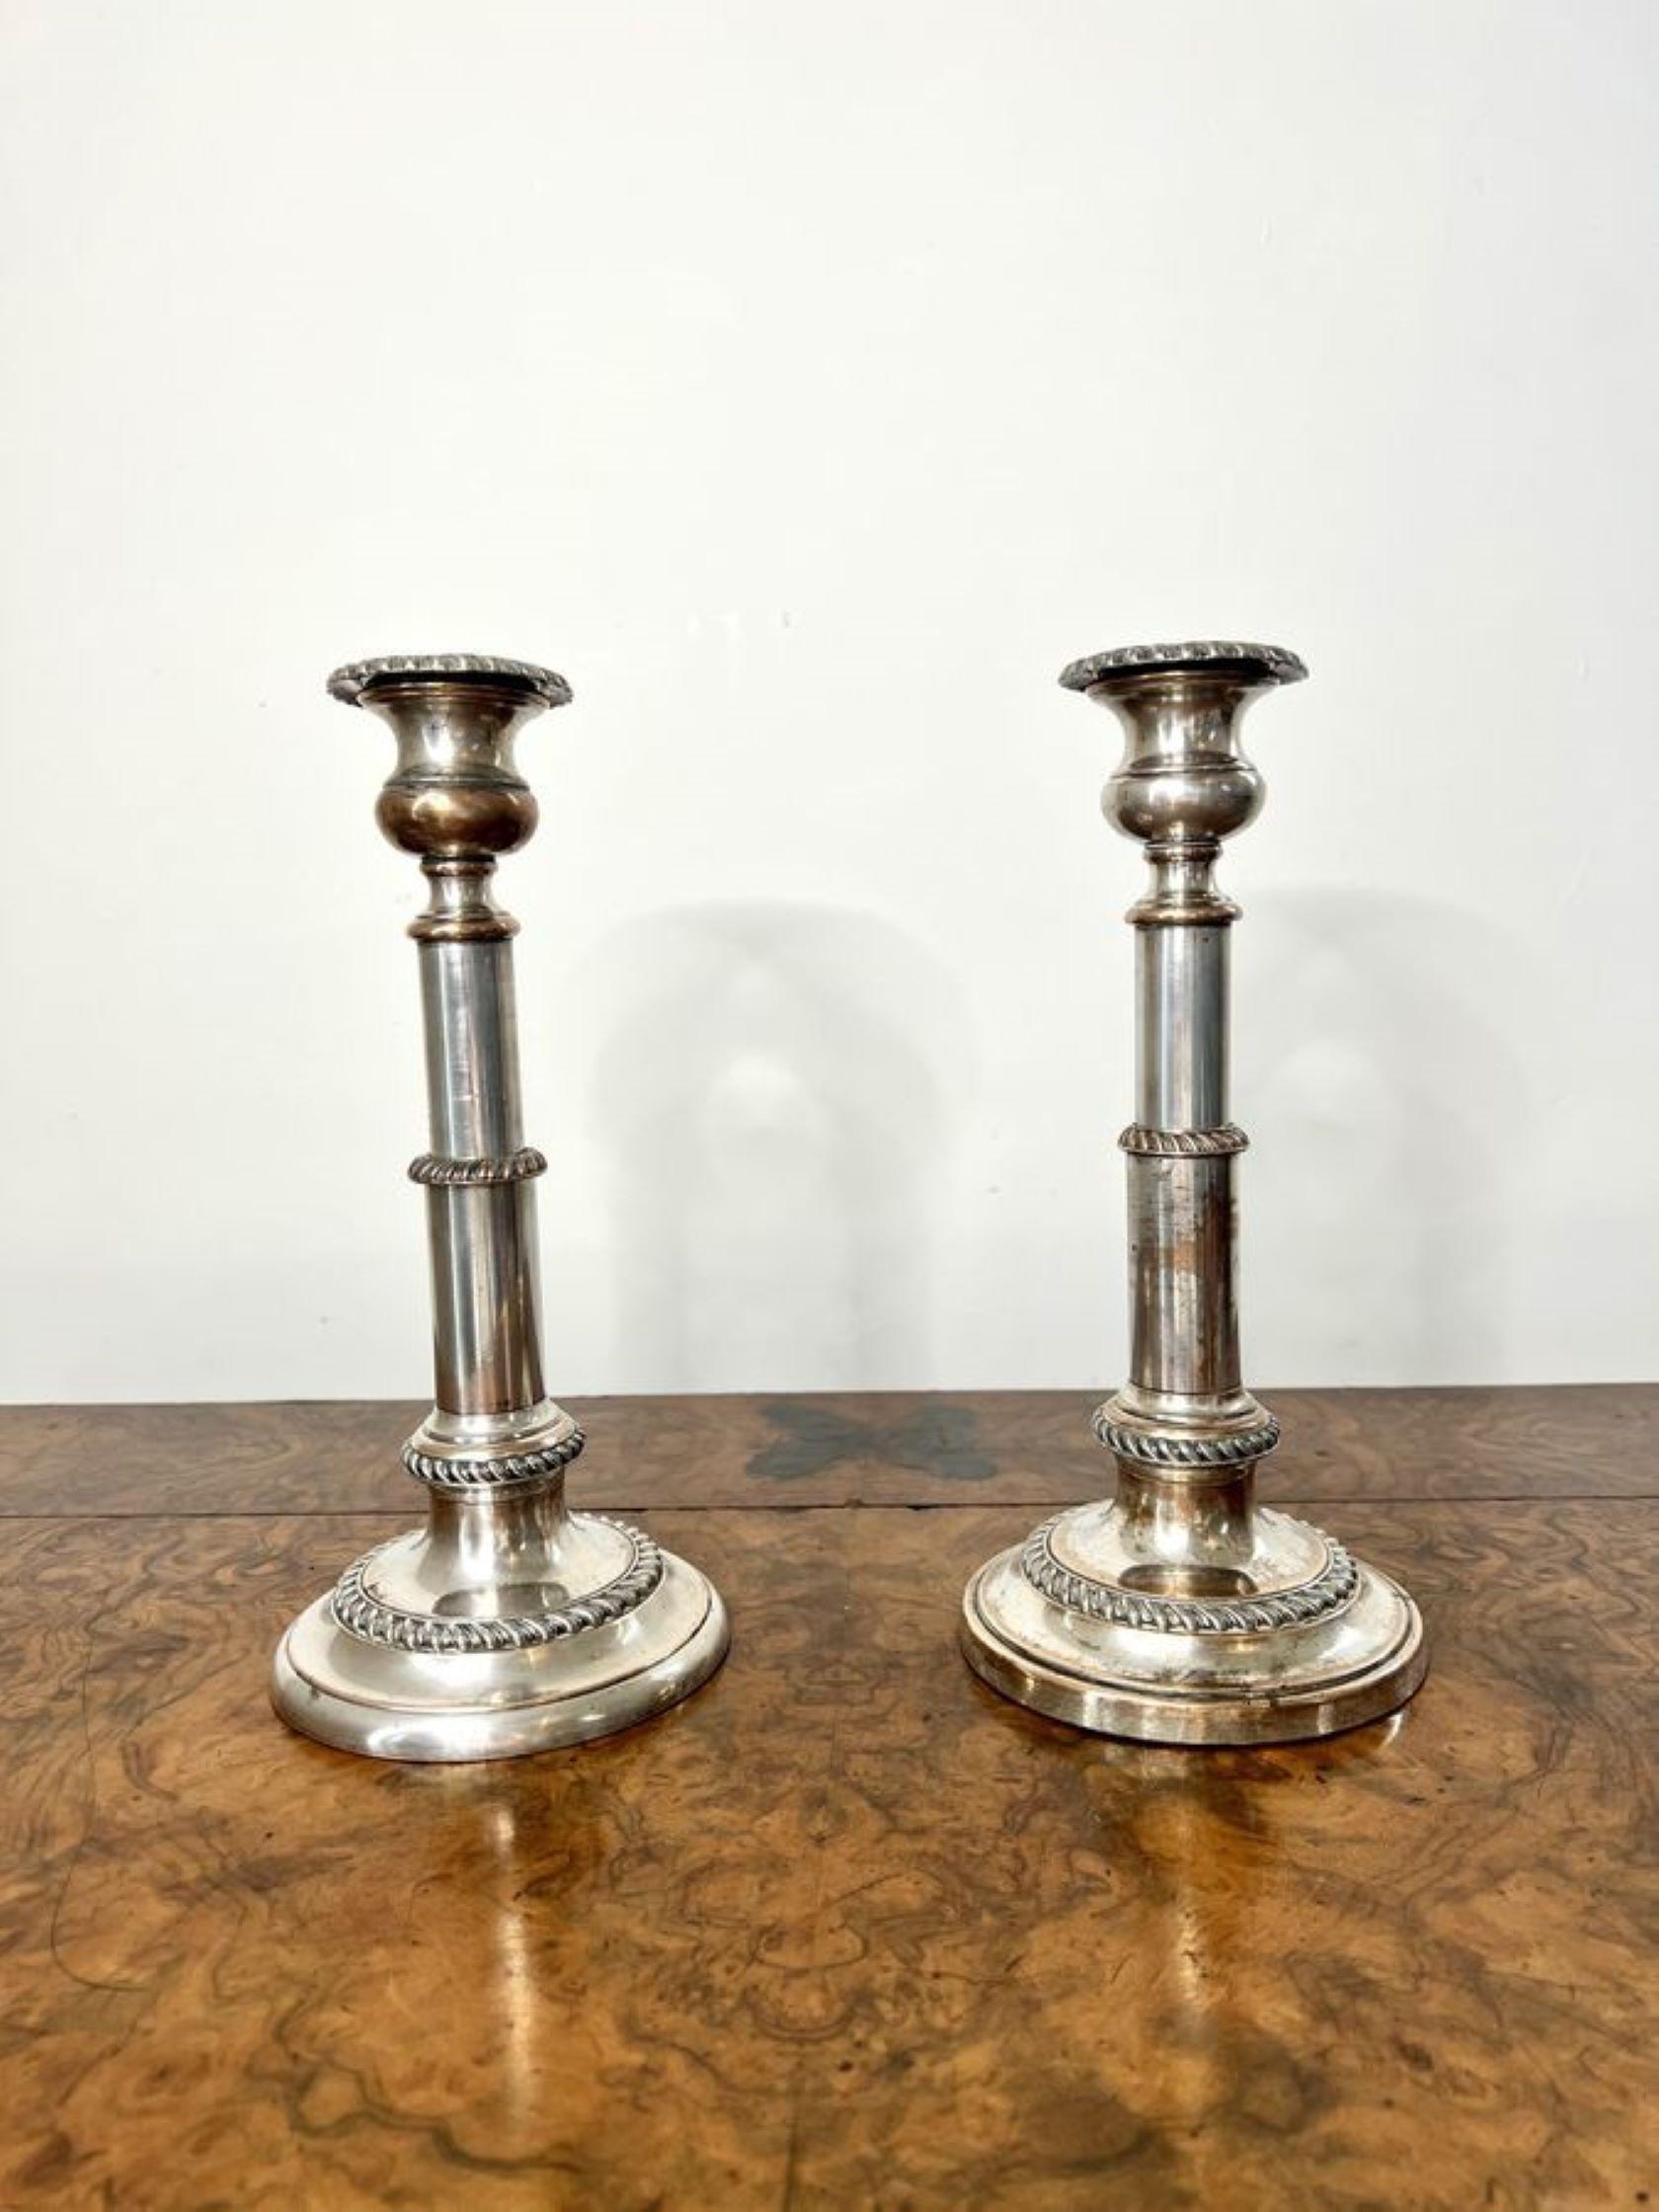 Pair of antique George III telescopic candlesticks having a quality pair of antique George III silver plated on copper telescopic candlesticks standing circular stepped bases.

D. 1800